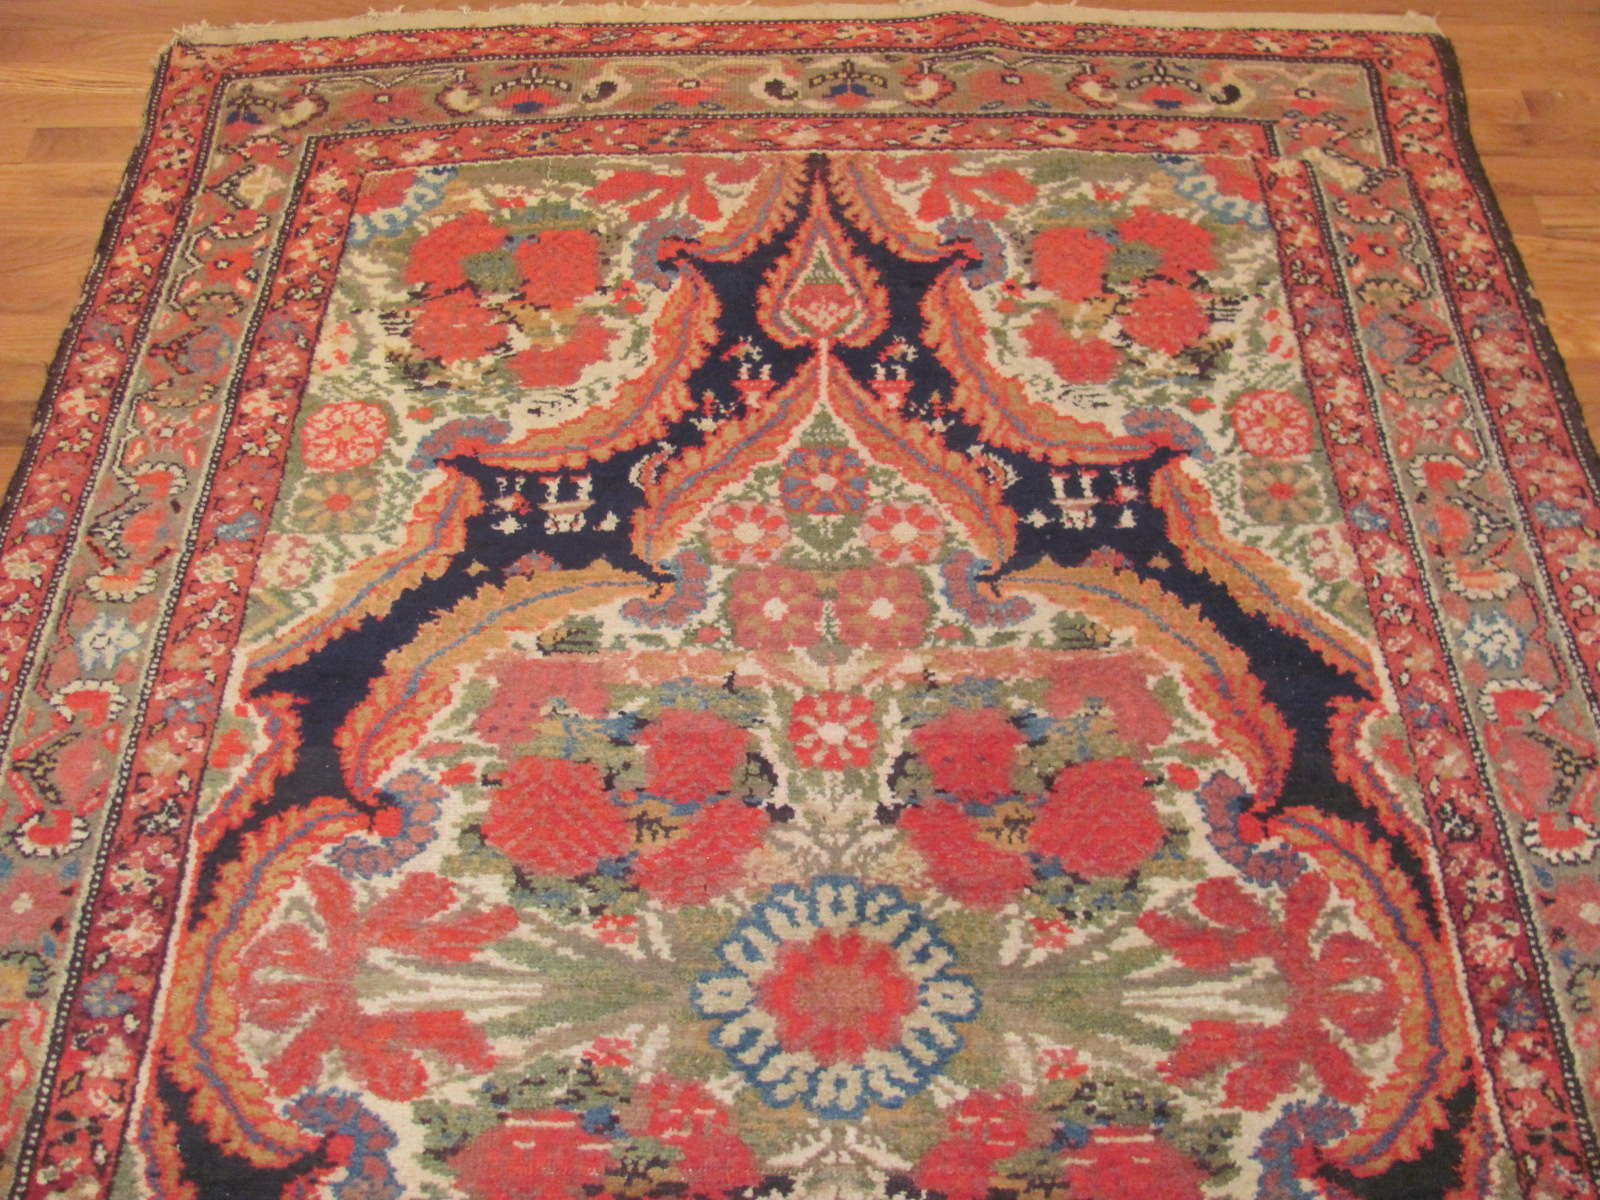 24430 antique persian malayer gallery runner 4,9x11,9 -1